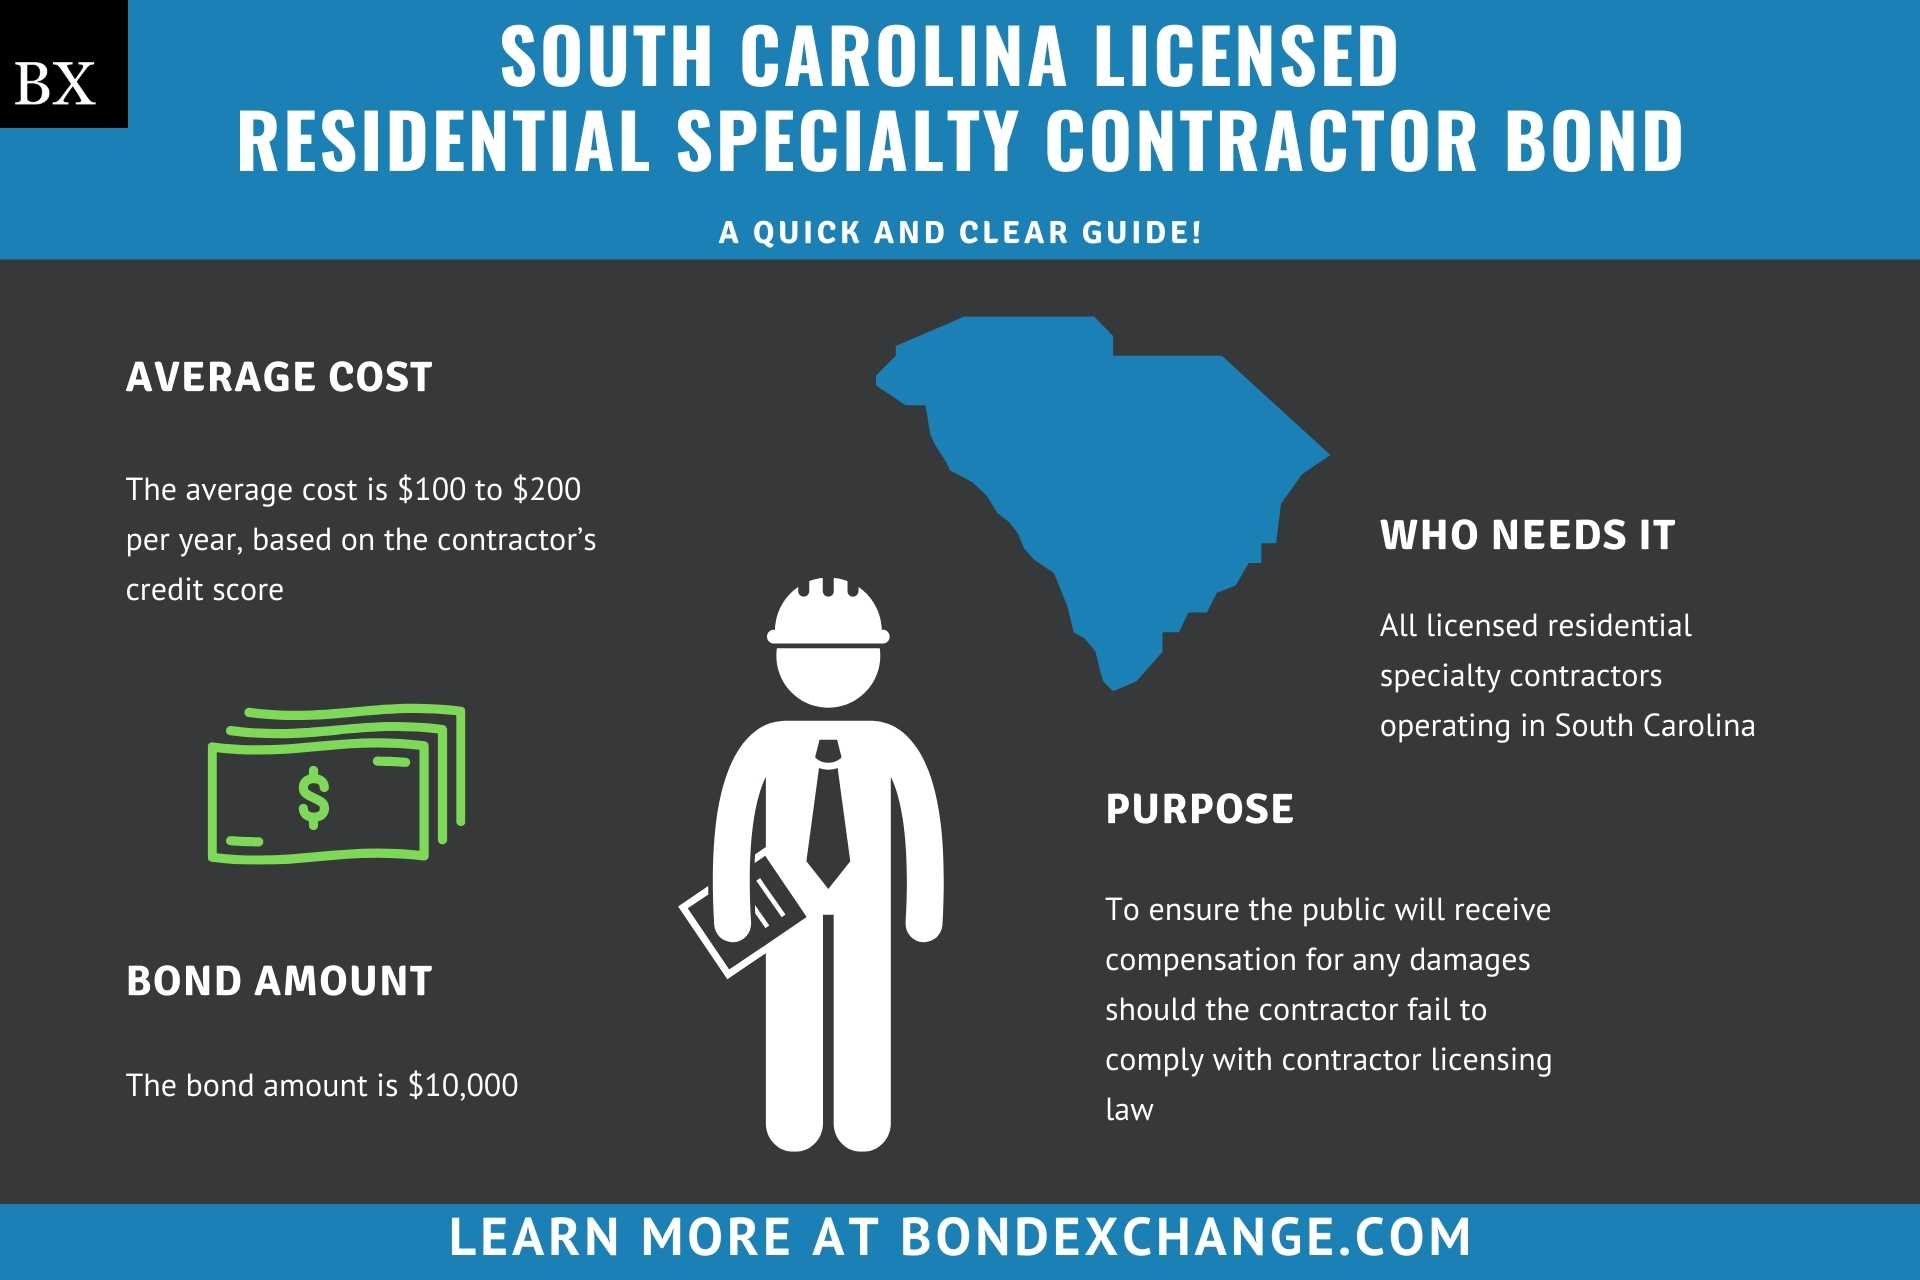 South Carolina Licensed Residential Specialty Contractor Bond